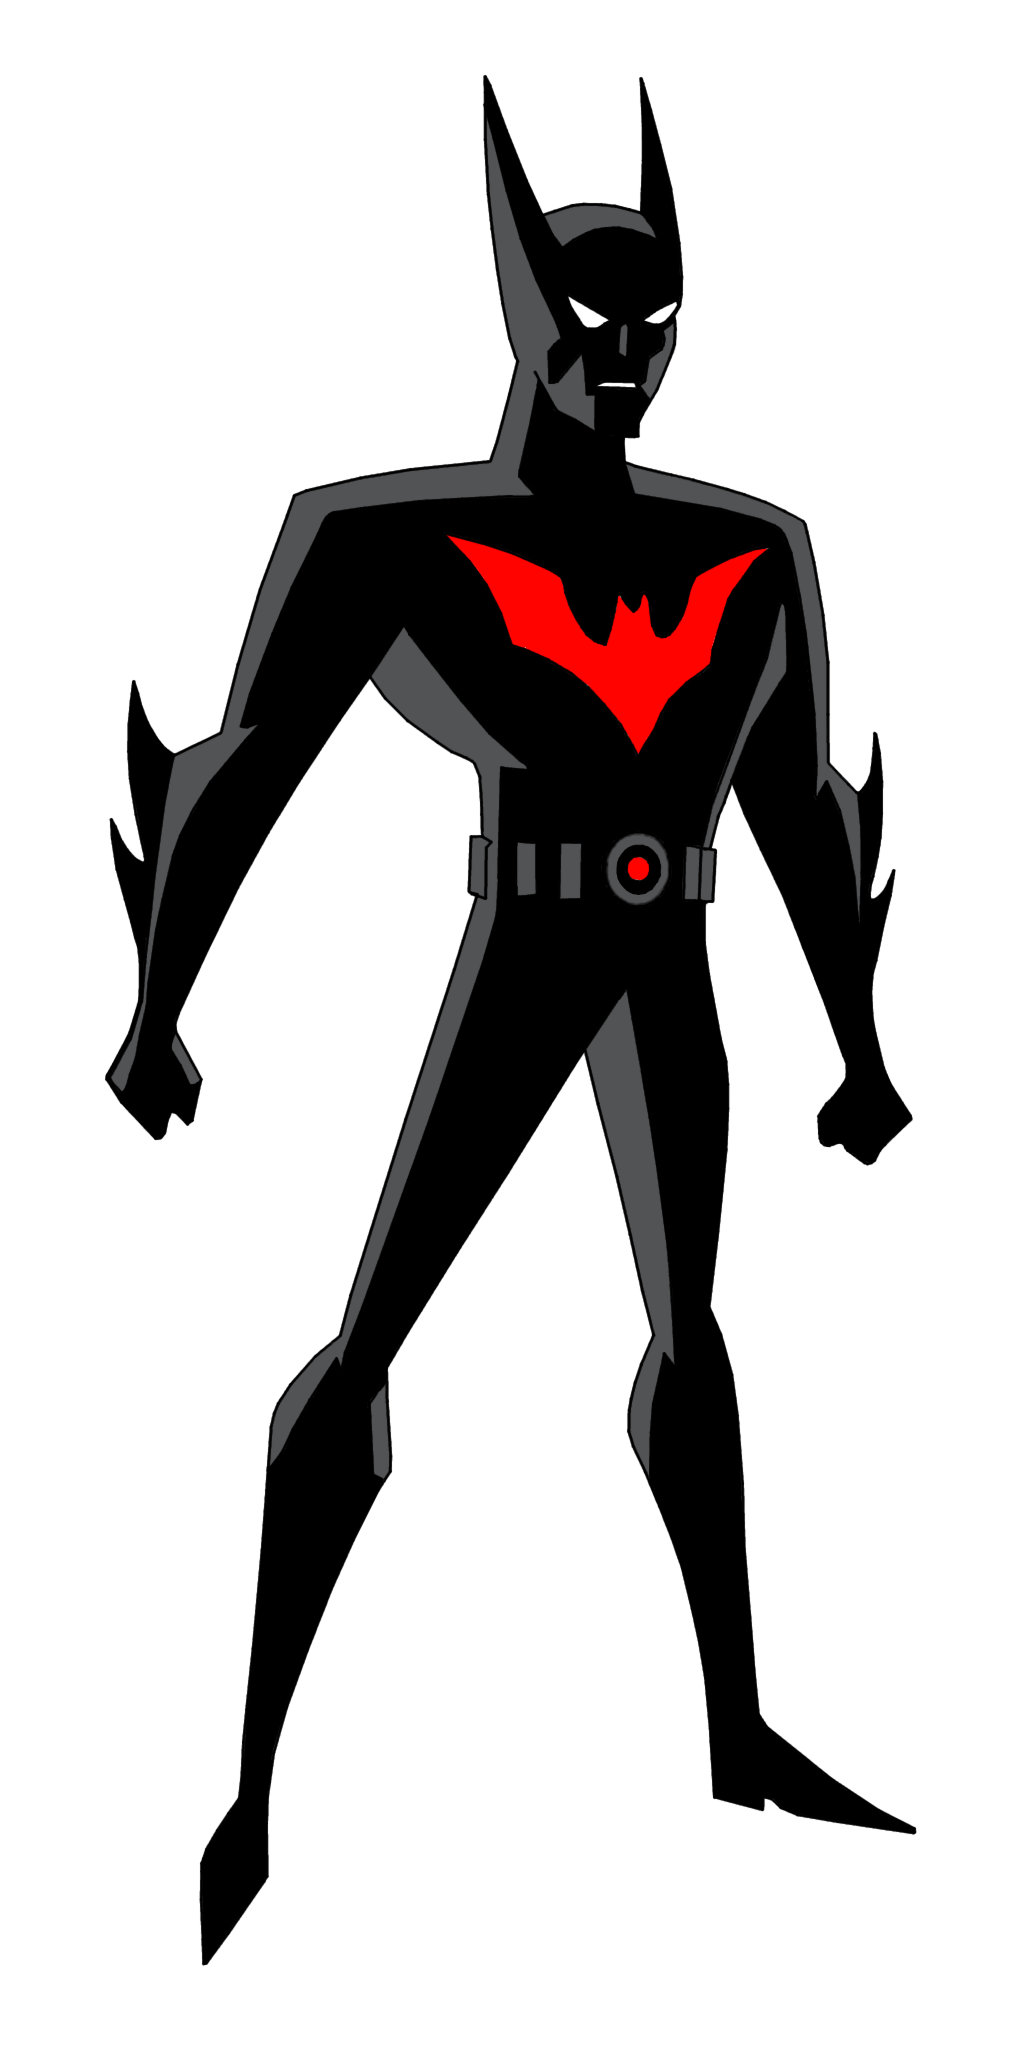 Batman Beyond: Batman by TheRealFB1 by TheRealFB1 on DeviantArt